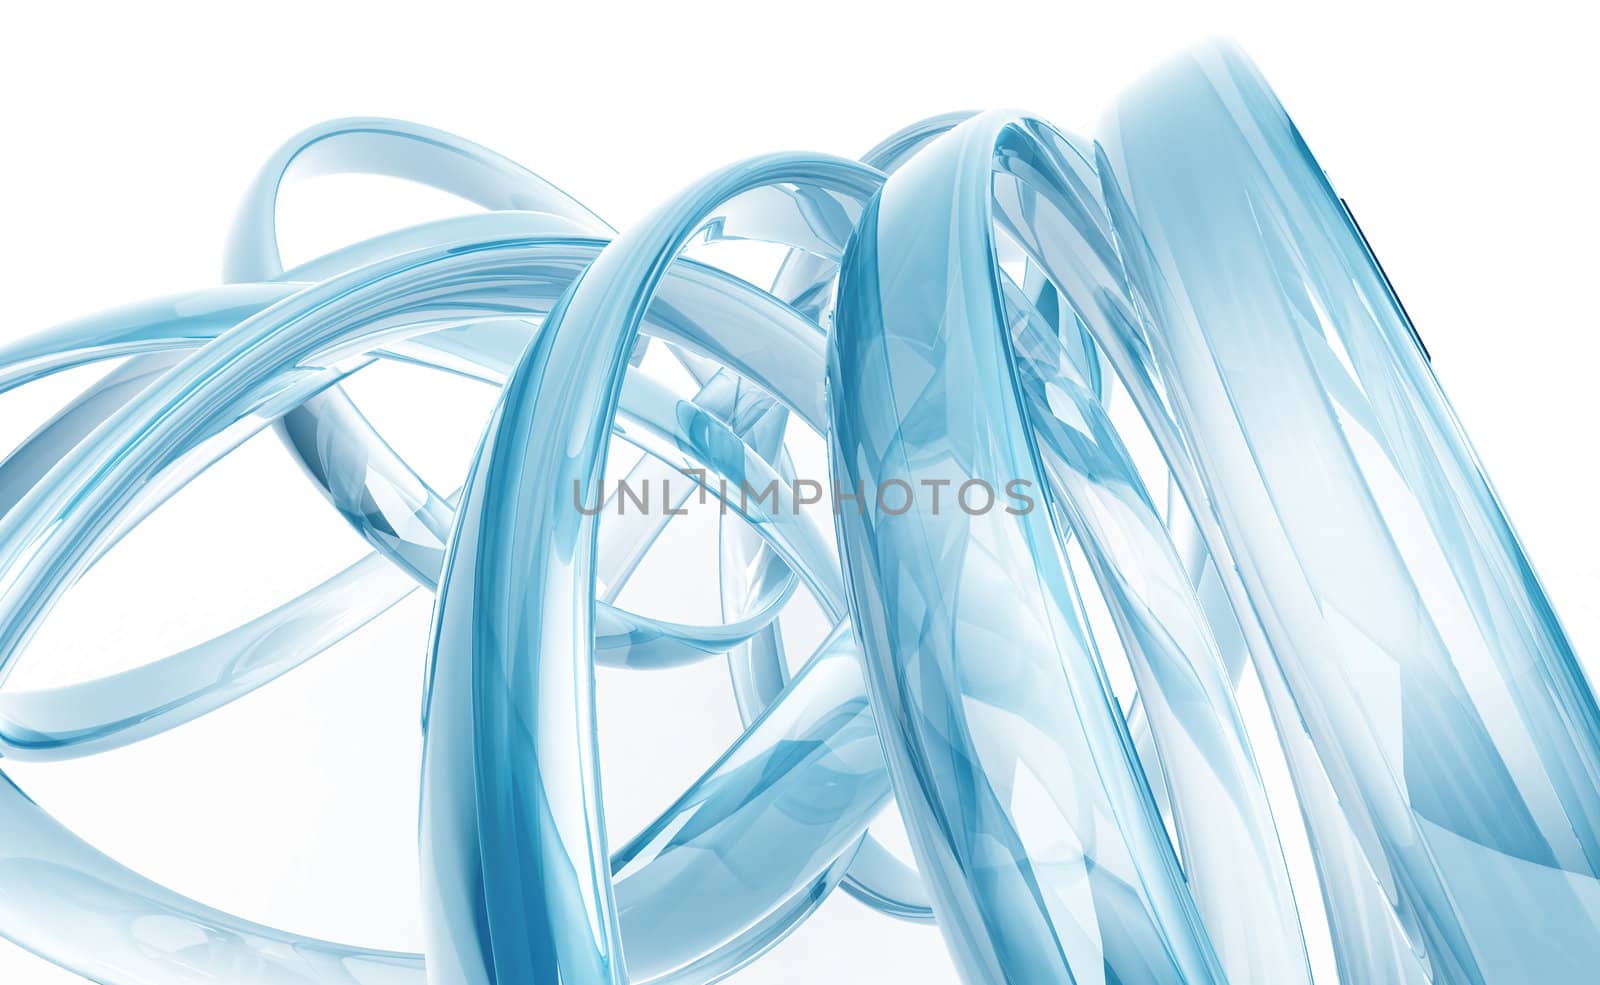 abstract transparent glass rings on white background by Serp